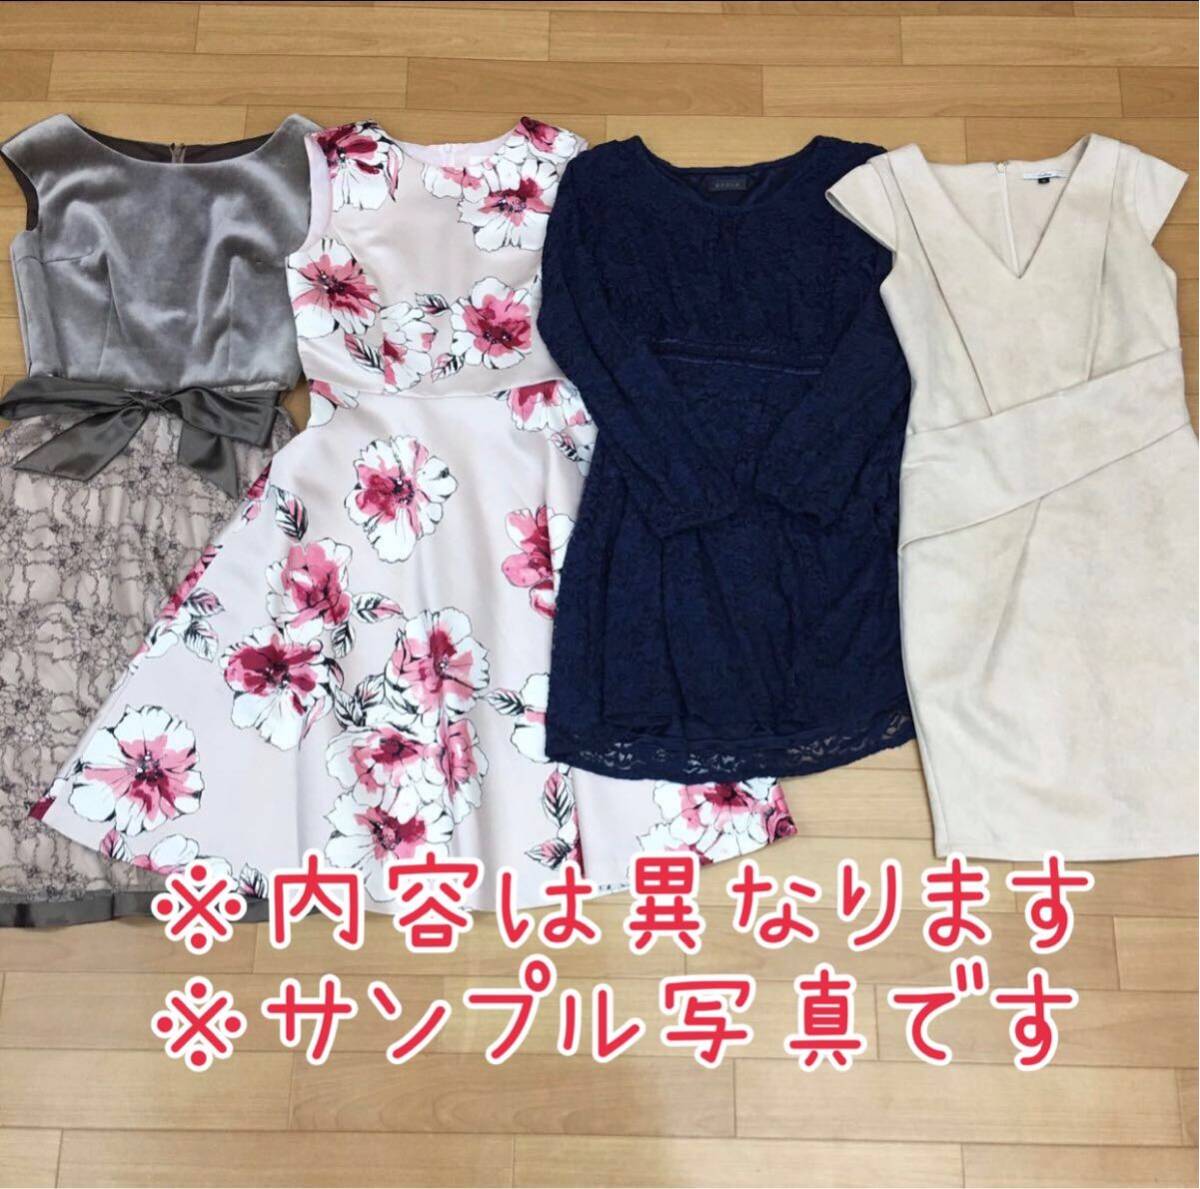 M5-23#① luck box! lady's One-piece summarize 50 point size various knees height long mi leak height floral print simple beautiful . on goods plain dealer large amount .